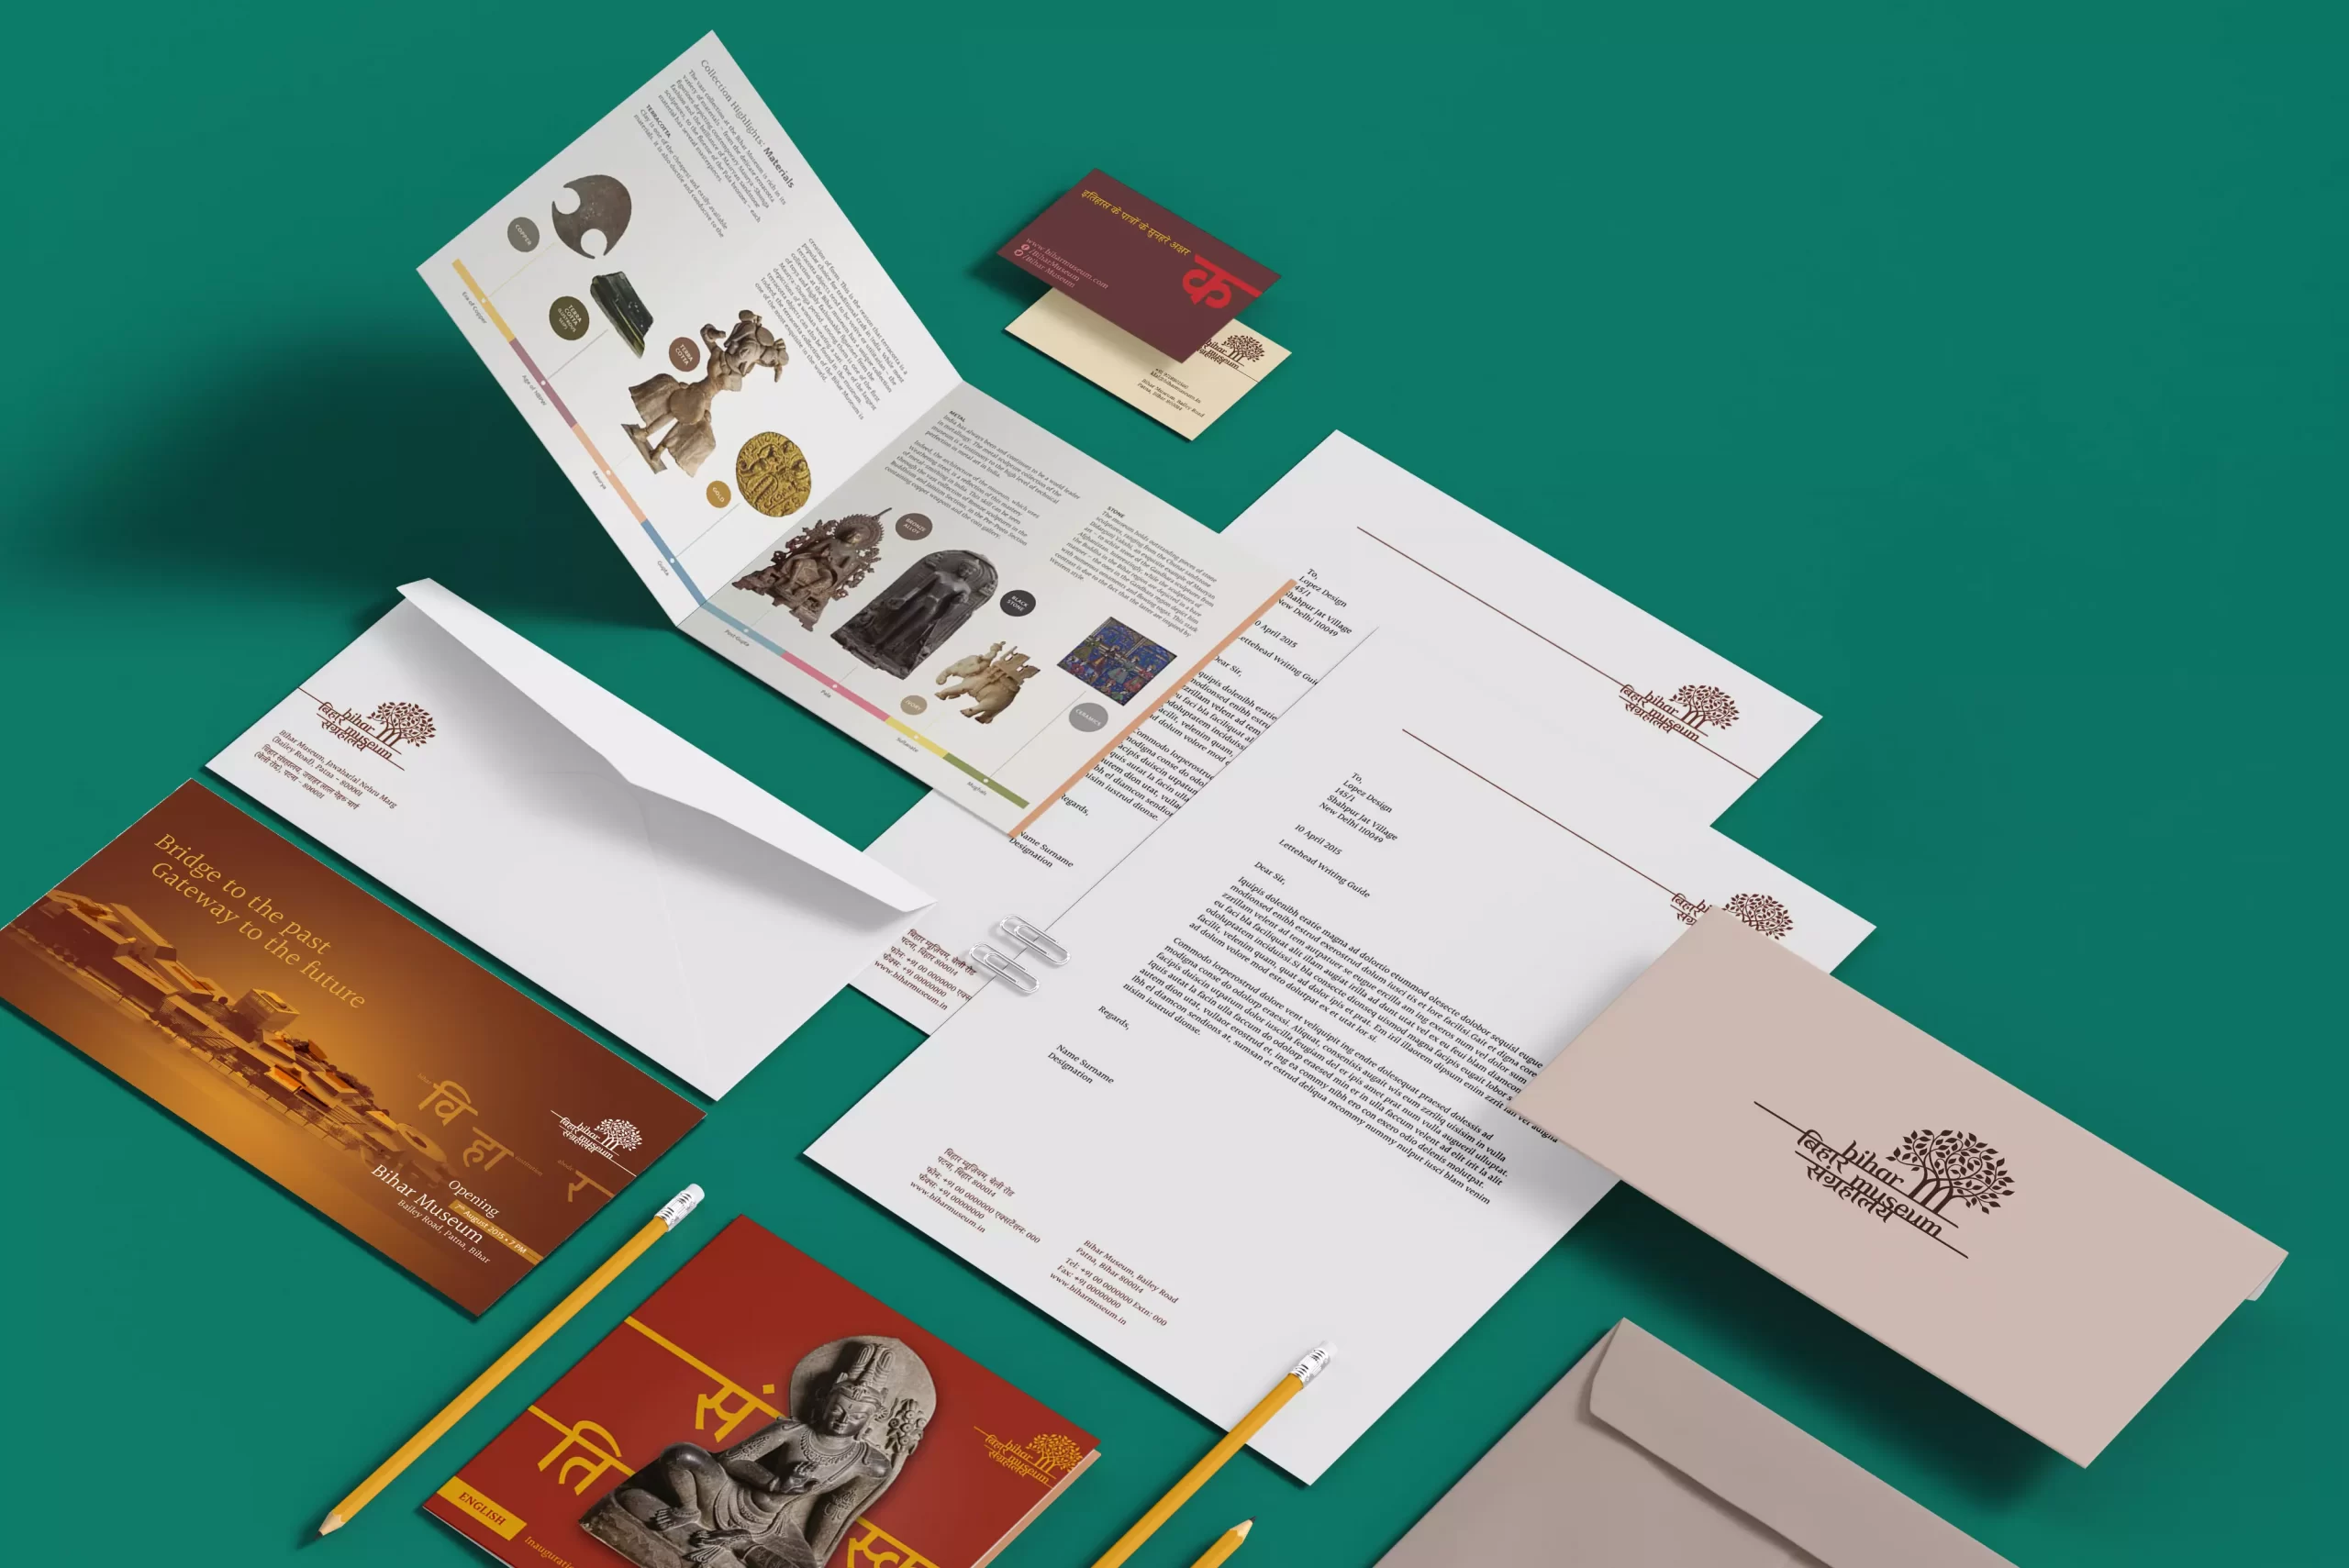 Collateral and stationery design for Bihar Museum